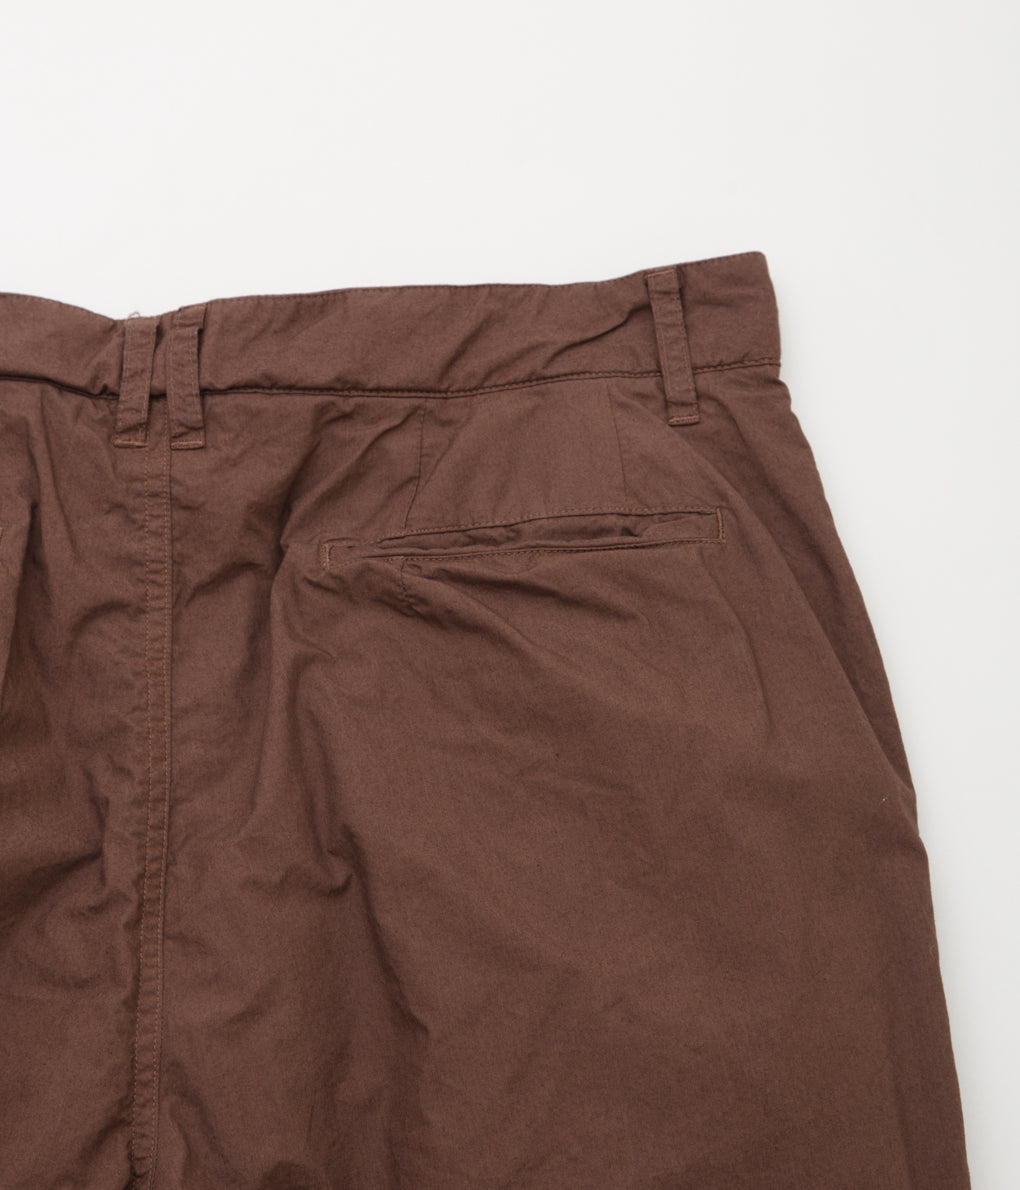 JAMES COWARD "PANTS FOR PIERRE BEAUGER  (GARMENT DYED DOUBLE TYPWRITER)"(BROWN)